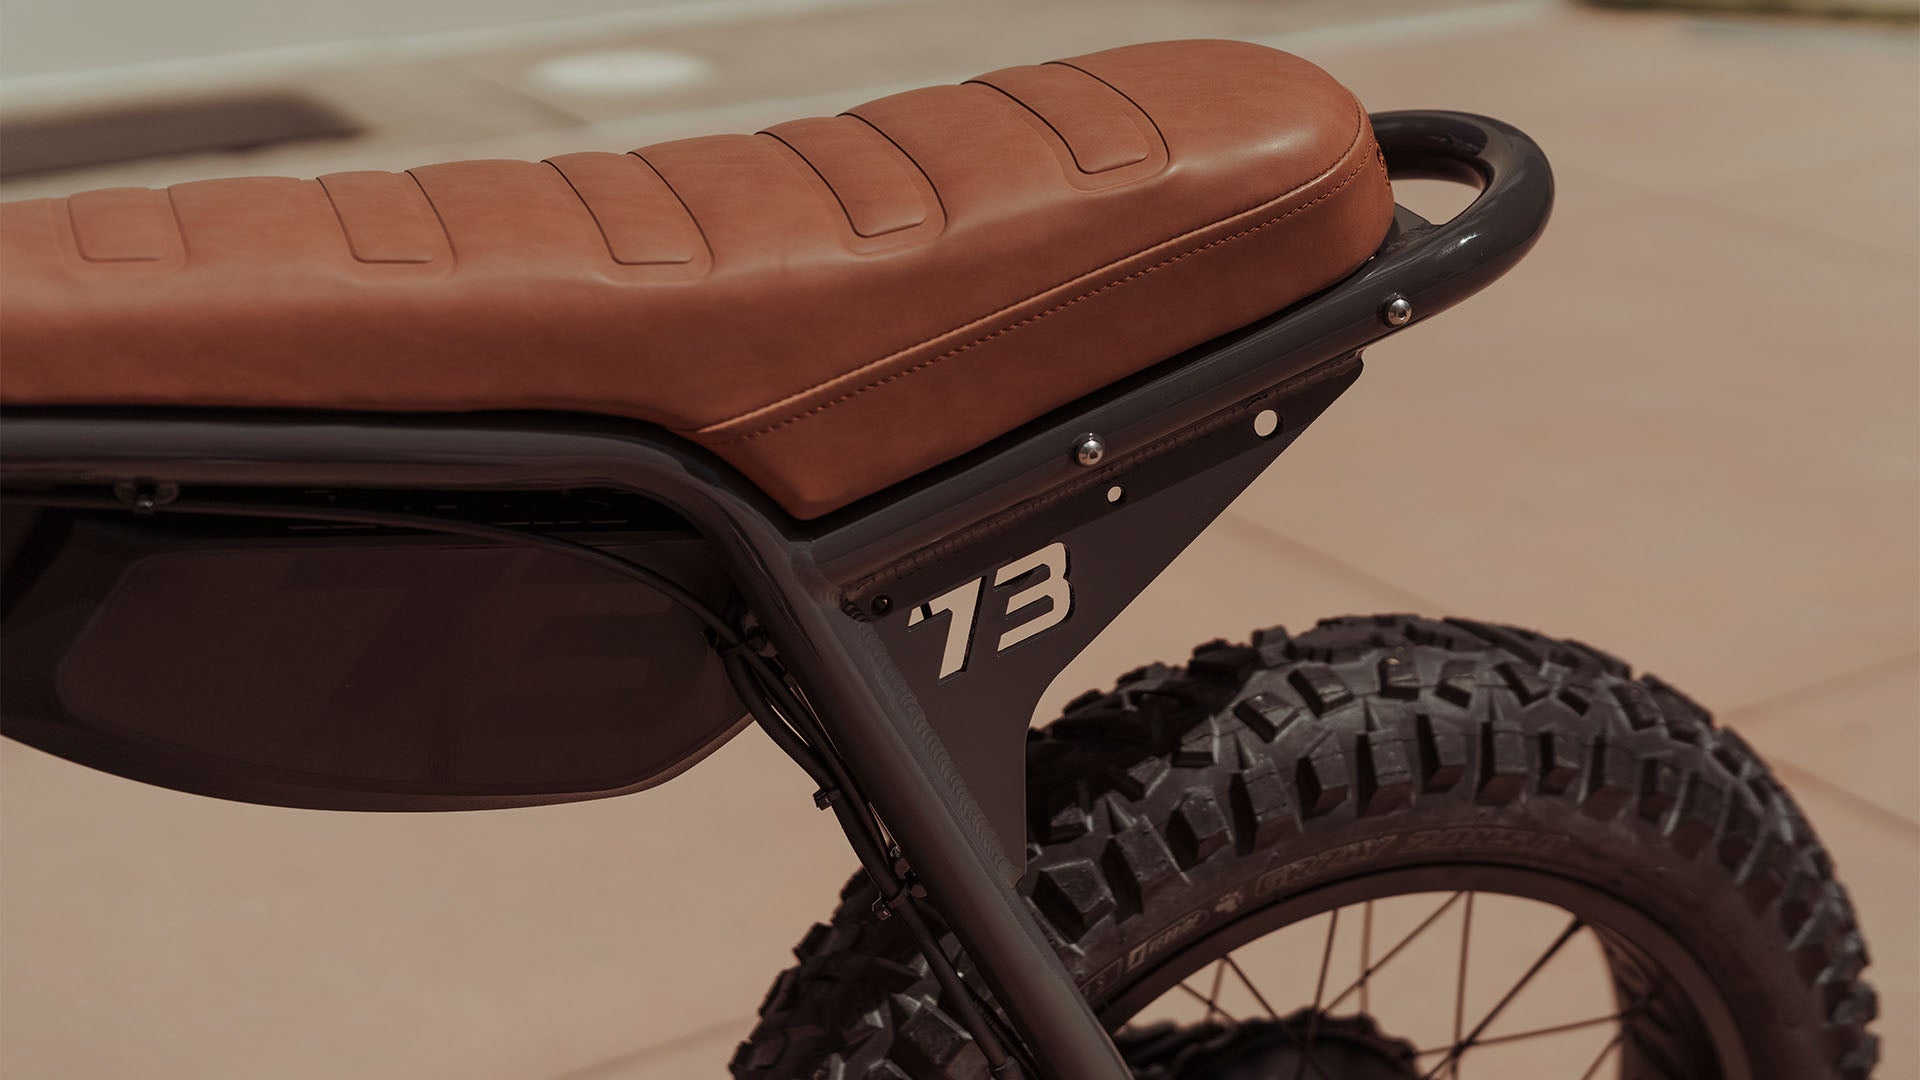 Close-up image of the seat and rear tire of the SUPER73-ZX SE ebike in Palladium